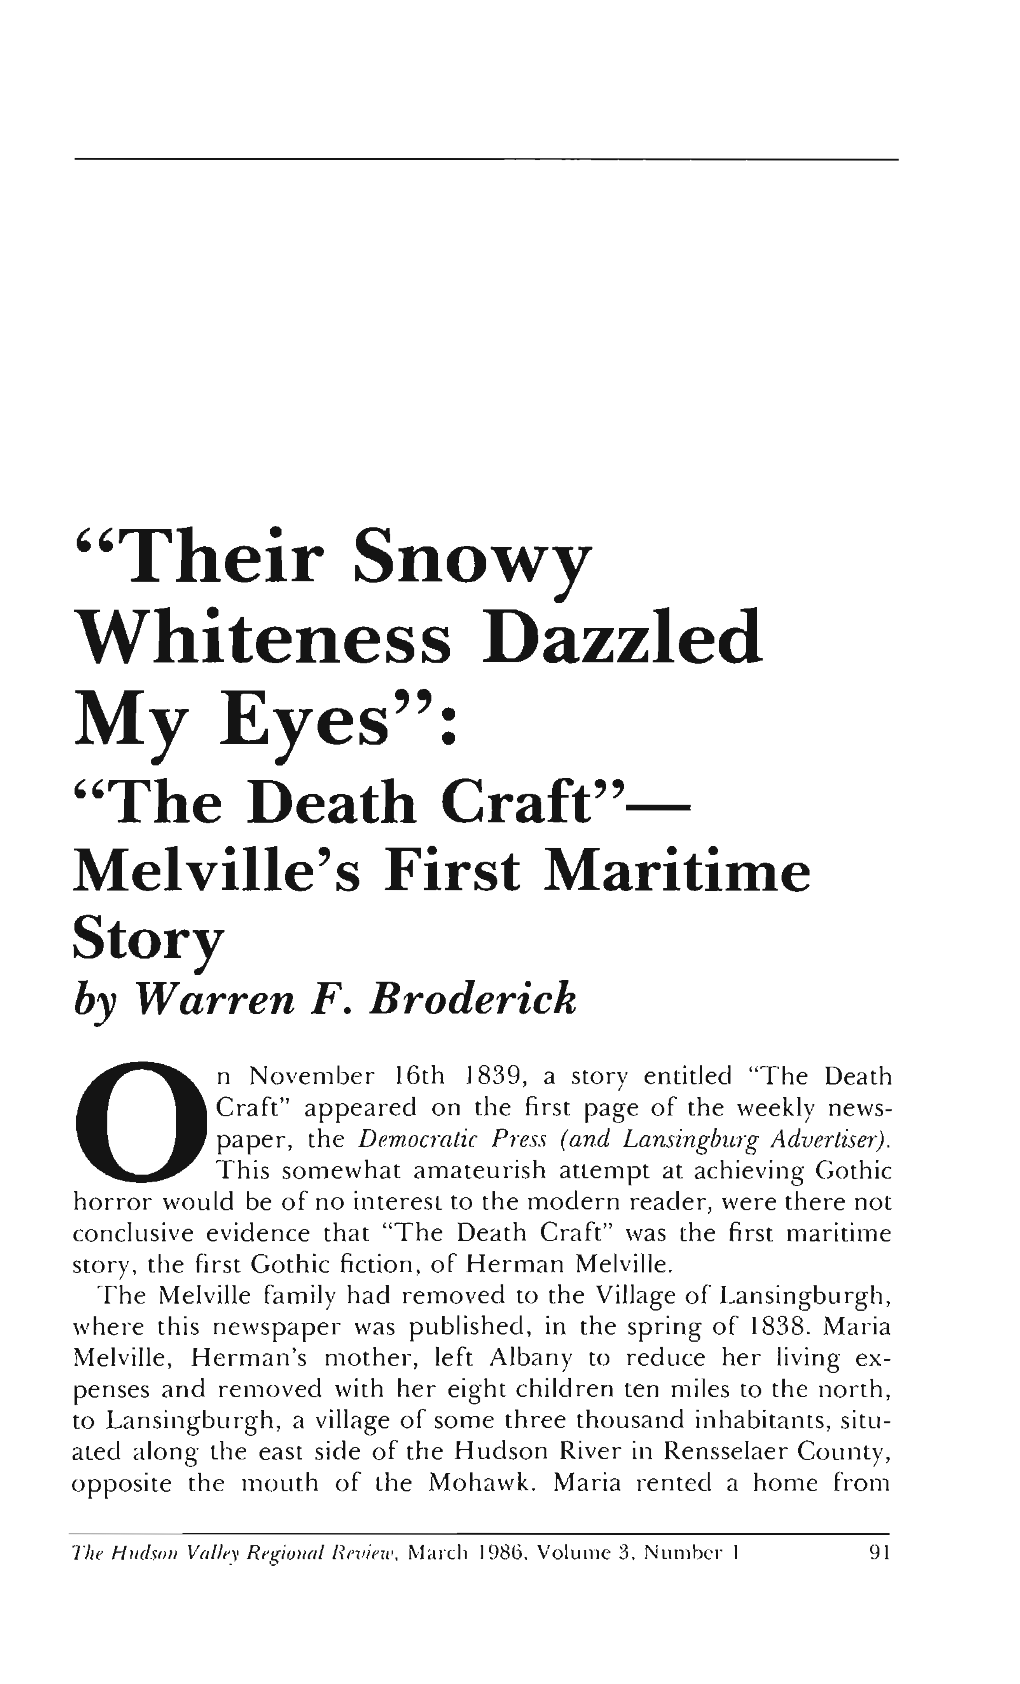 Their Snowy Whiteness Dazzled My Eyes the Death Craft Melvilles First